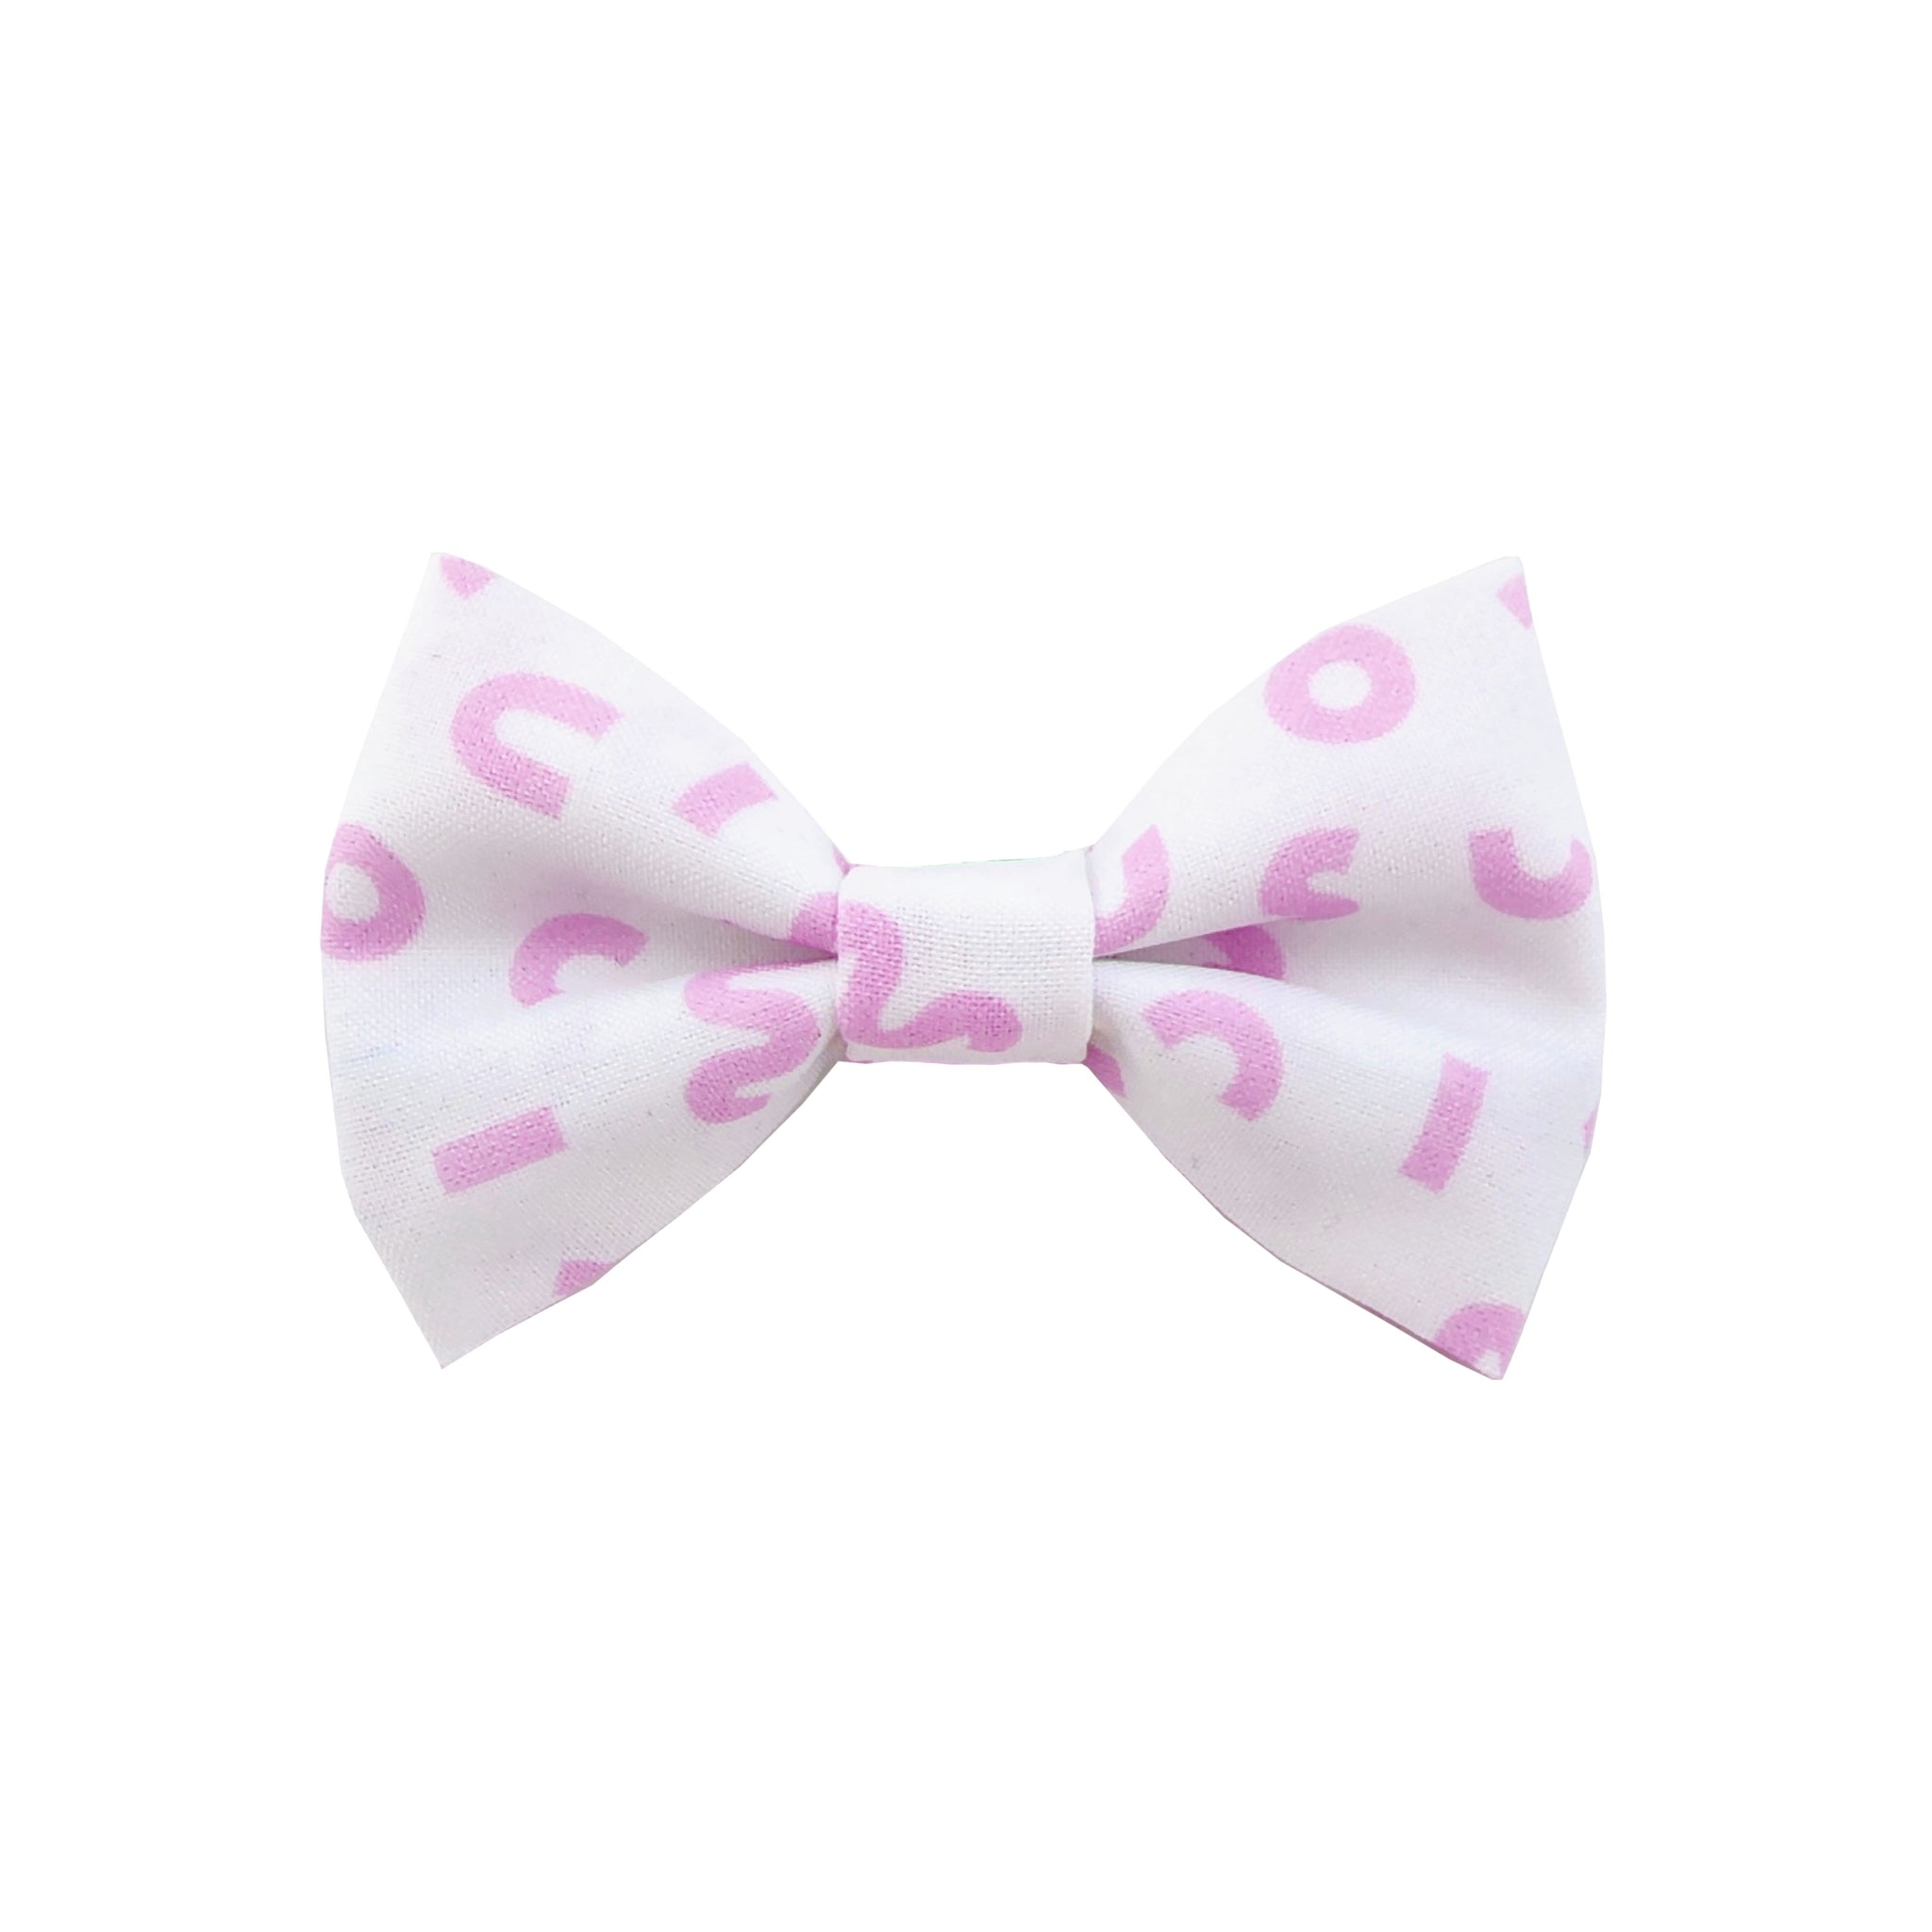 SQUIGGLE JINGLE Bow Tie - Pink